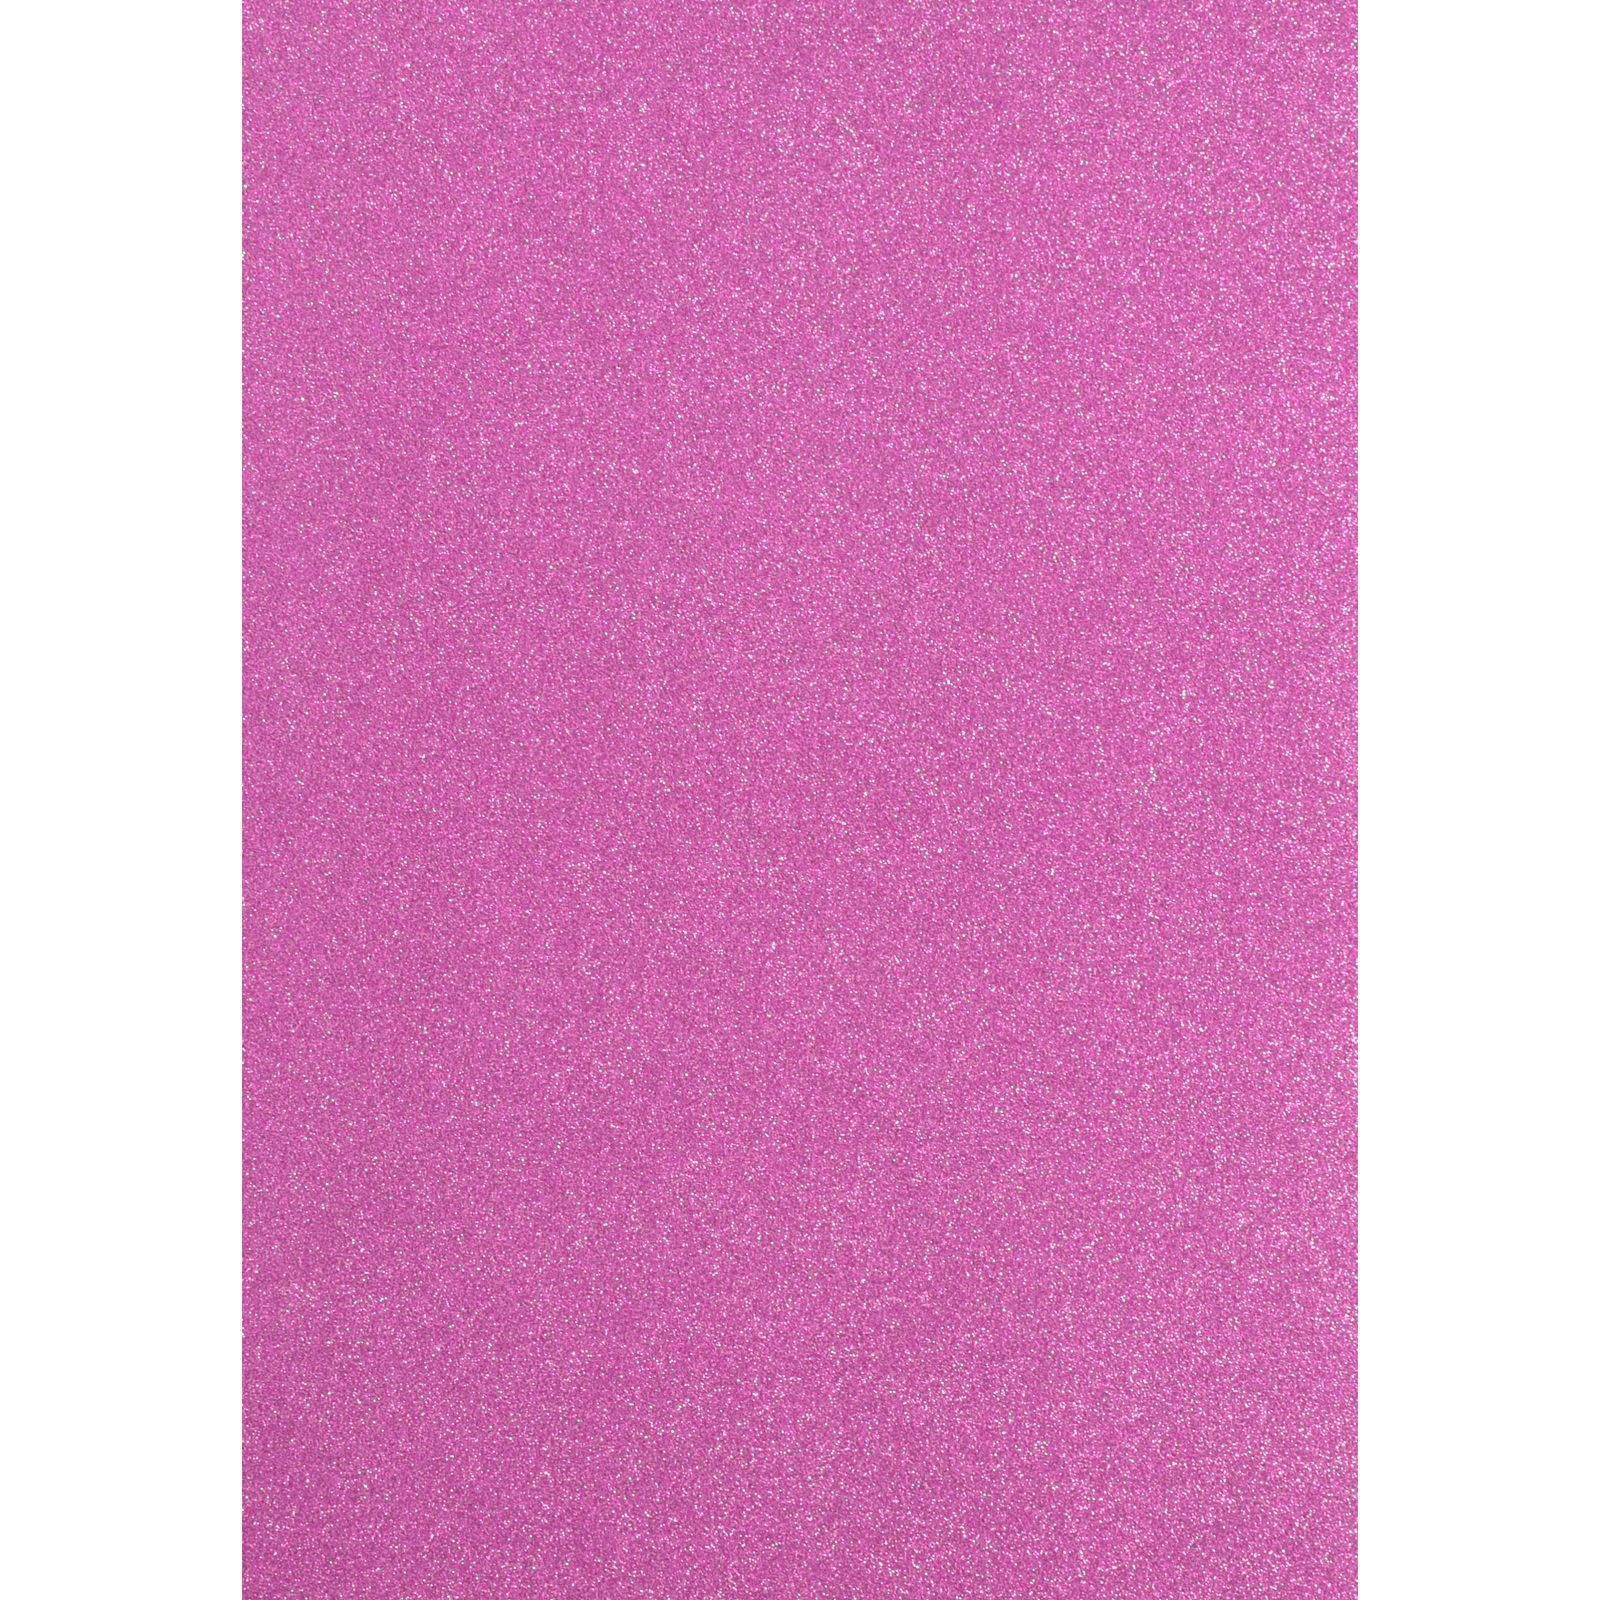 pink Glitter Cardstock Paper Thick Sparkling Glitter Paper 